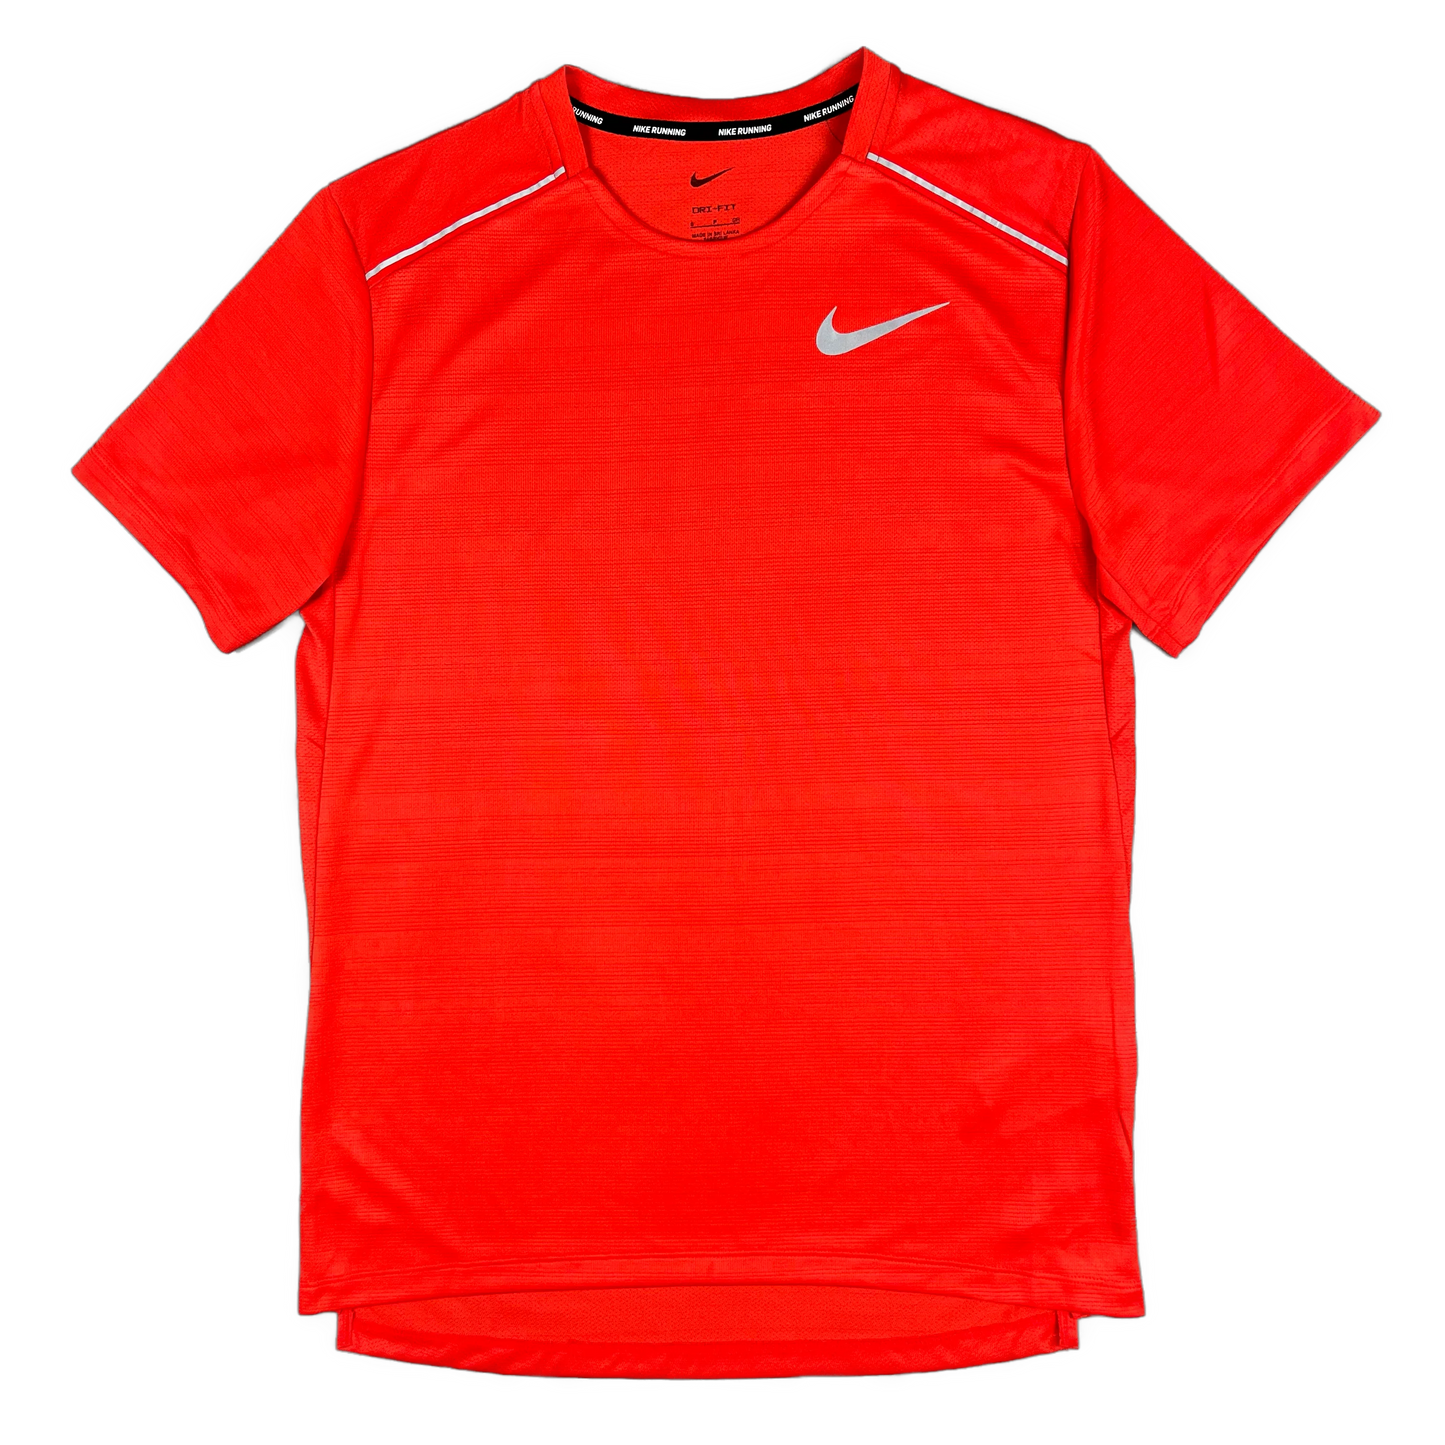 Nike Miler 1.0 T-Shirt - Chile Red